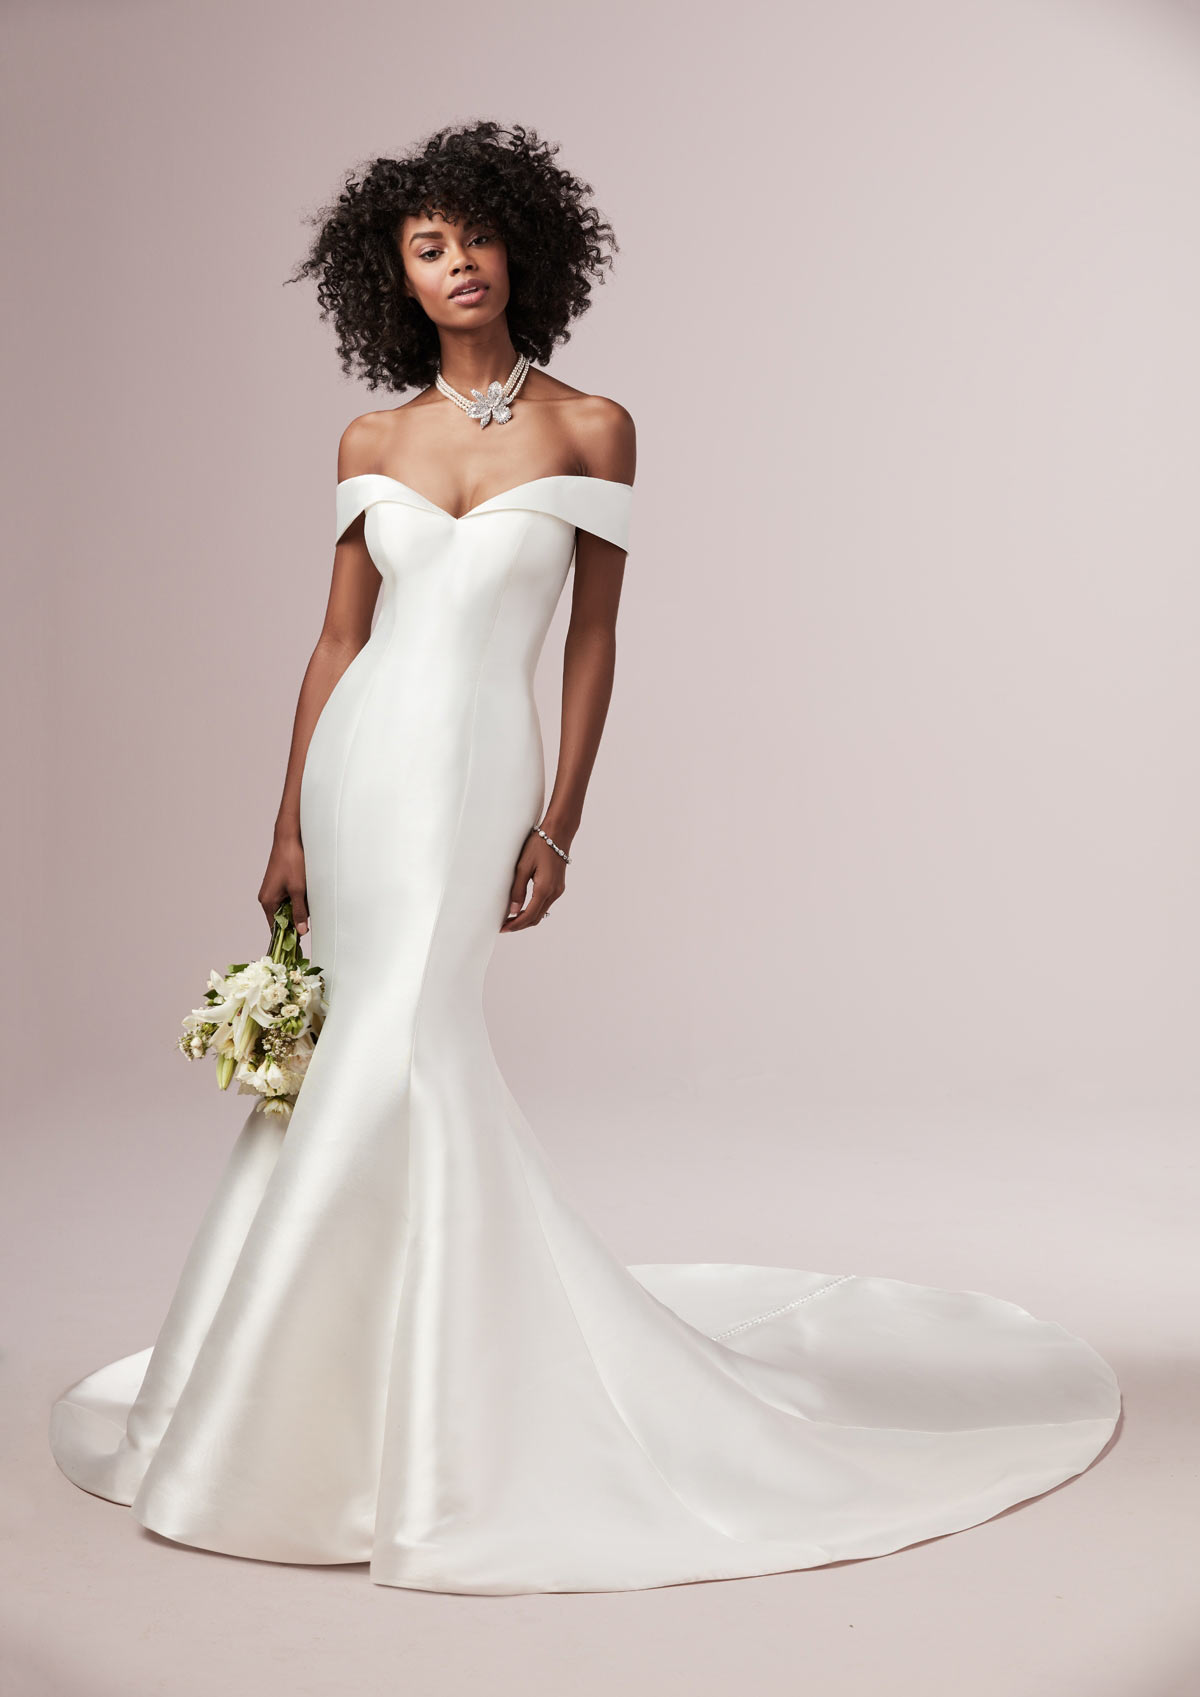 January sale at Bliss Bridal Gowns